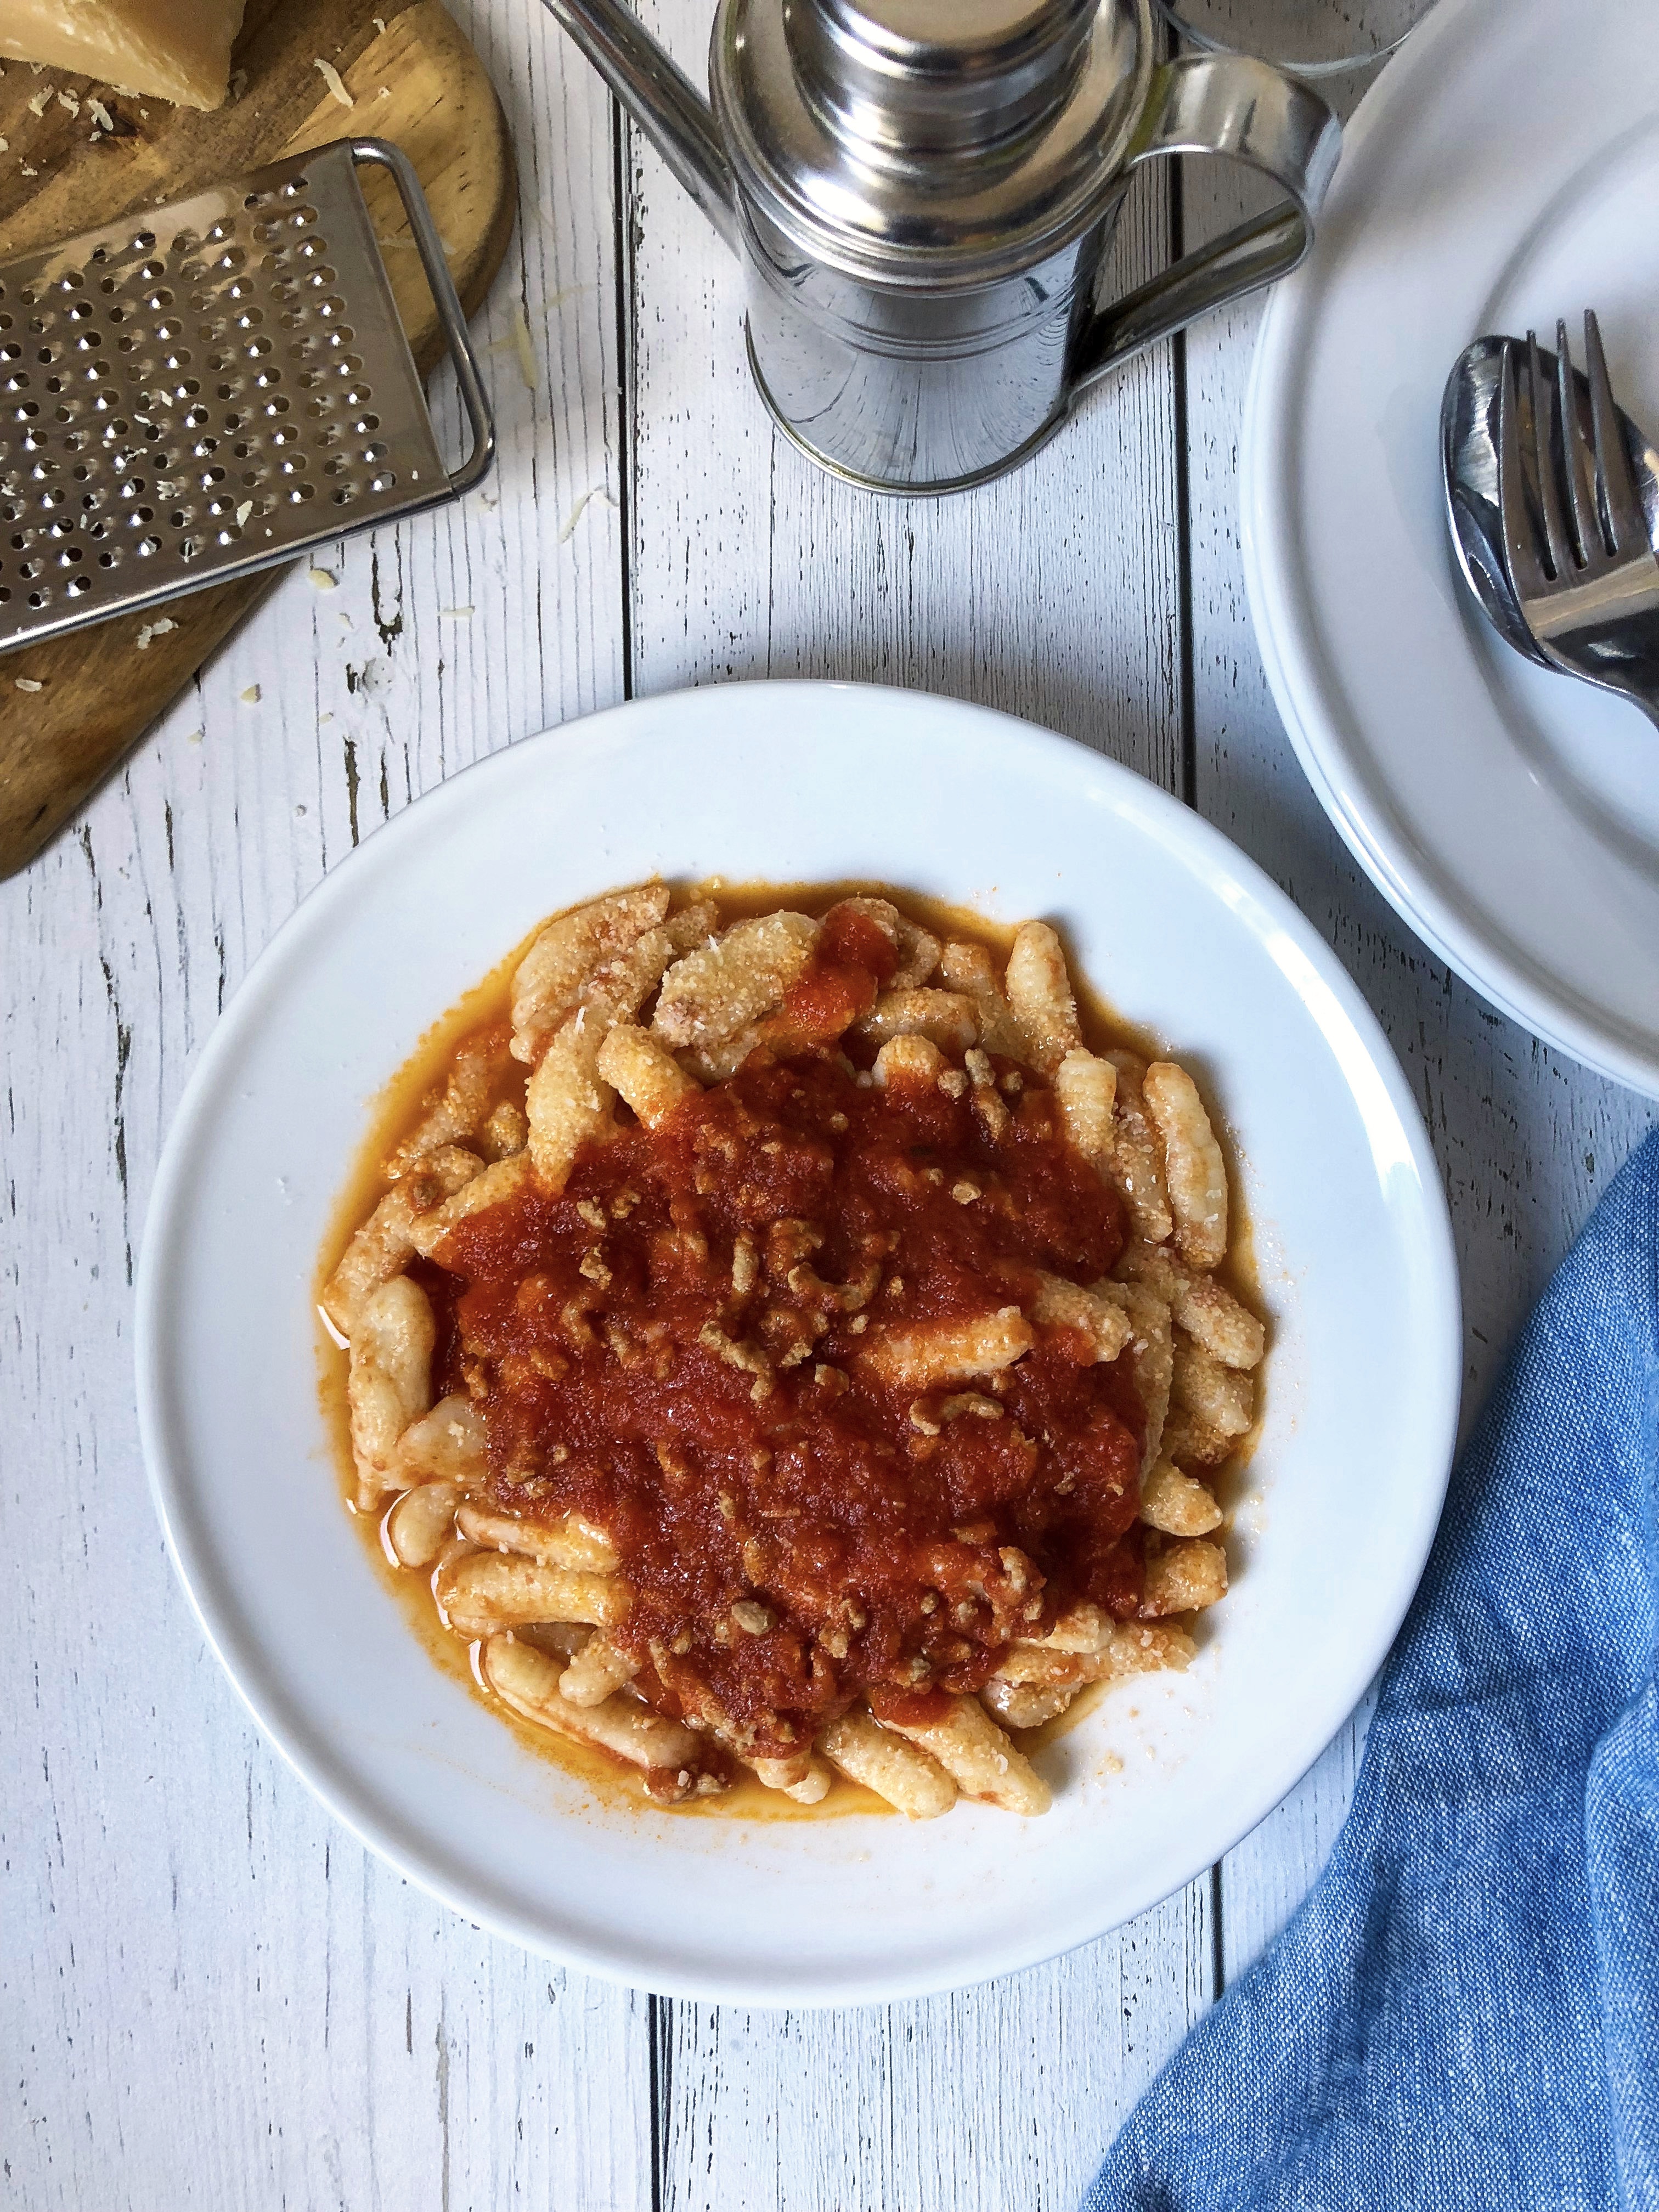 Homemade pasta with meat sauce